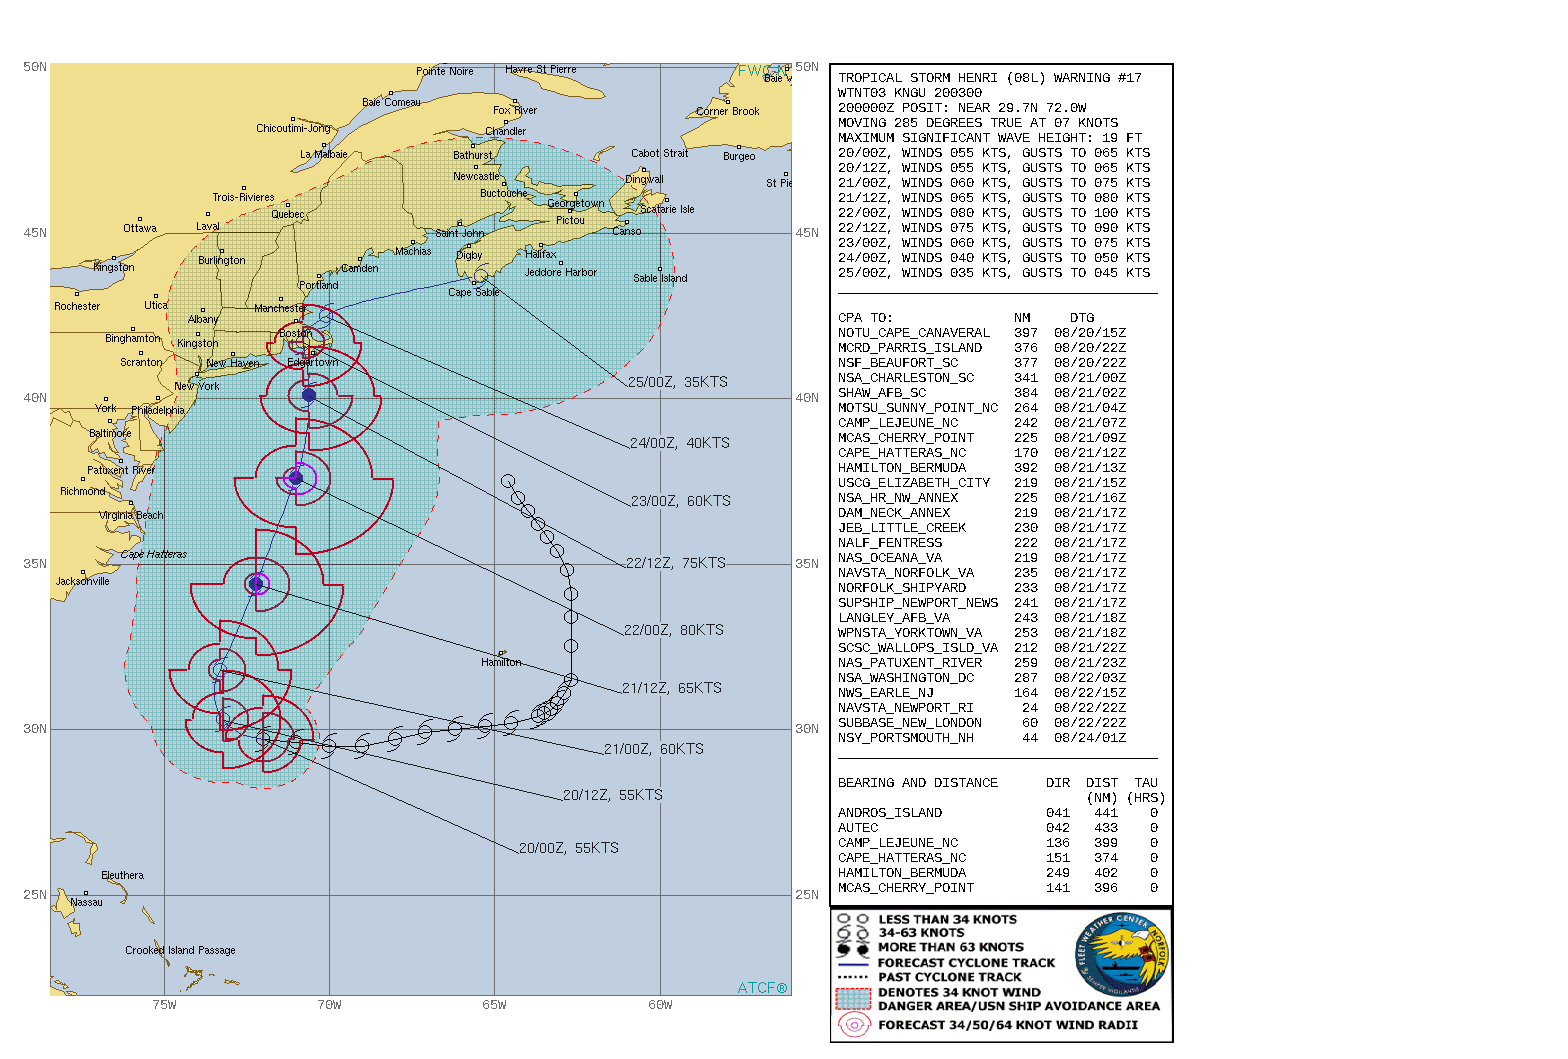 TS 08L(HENRI). WARNING 17 ISSUED AT 20/03UTC. CURRENT INTENSITY IS 55KNOTS AND IS FORECAST TO PEAK AT 80KNOTS/CAT 1 BY 22/00UTC.